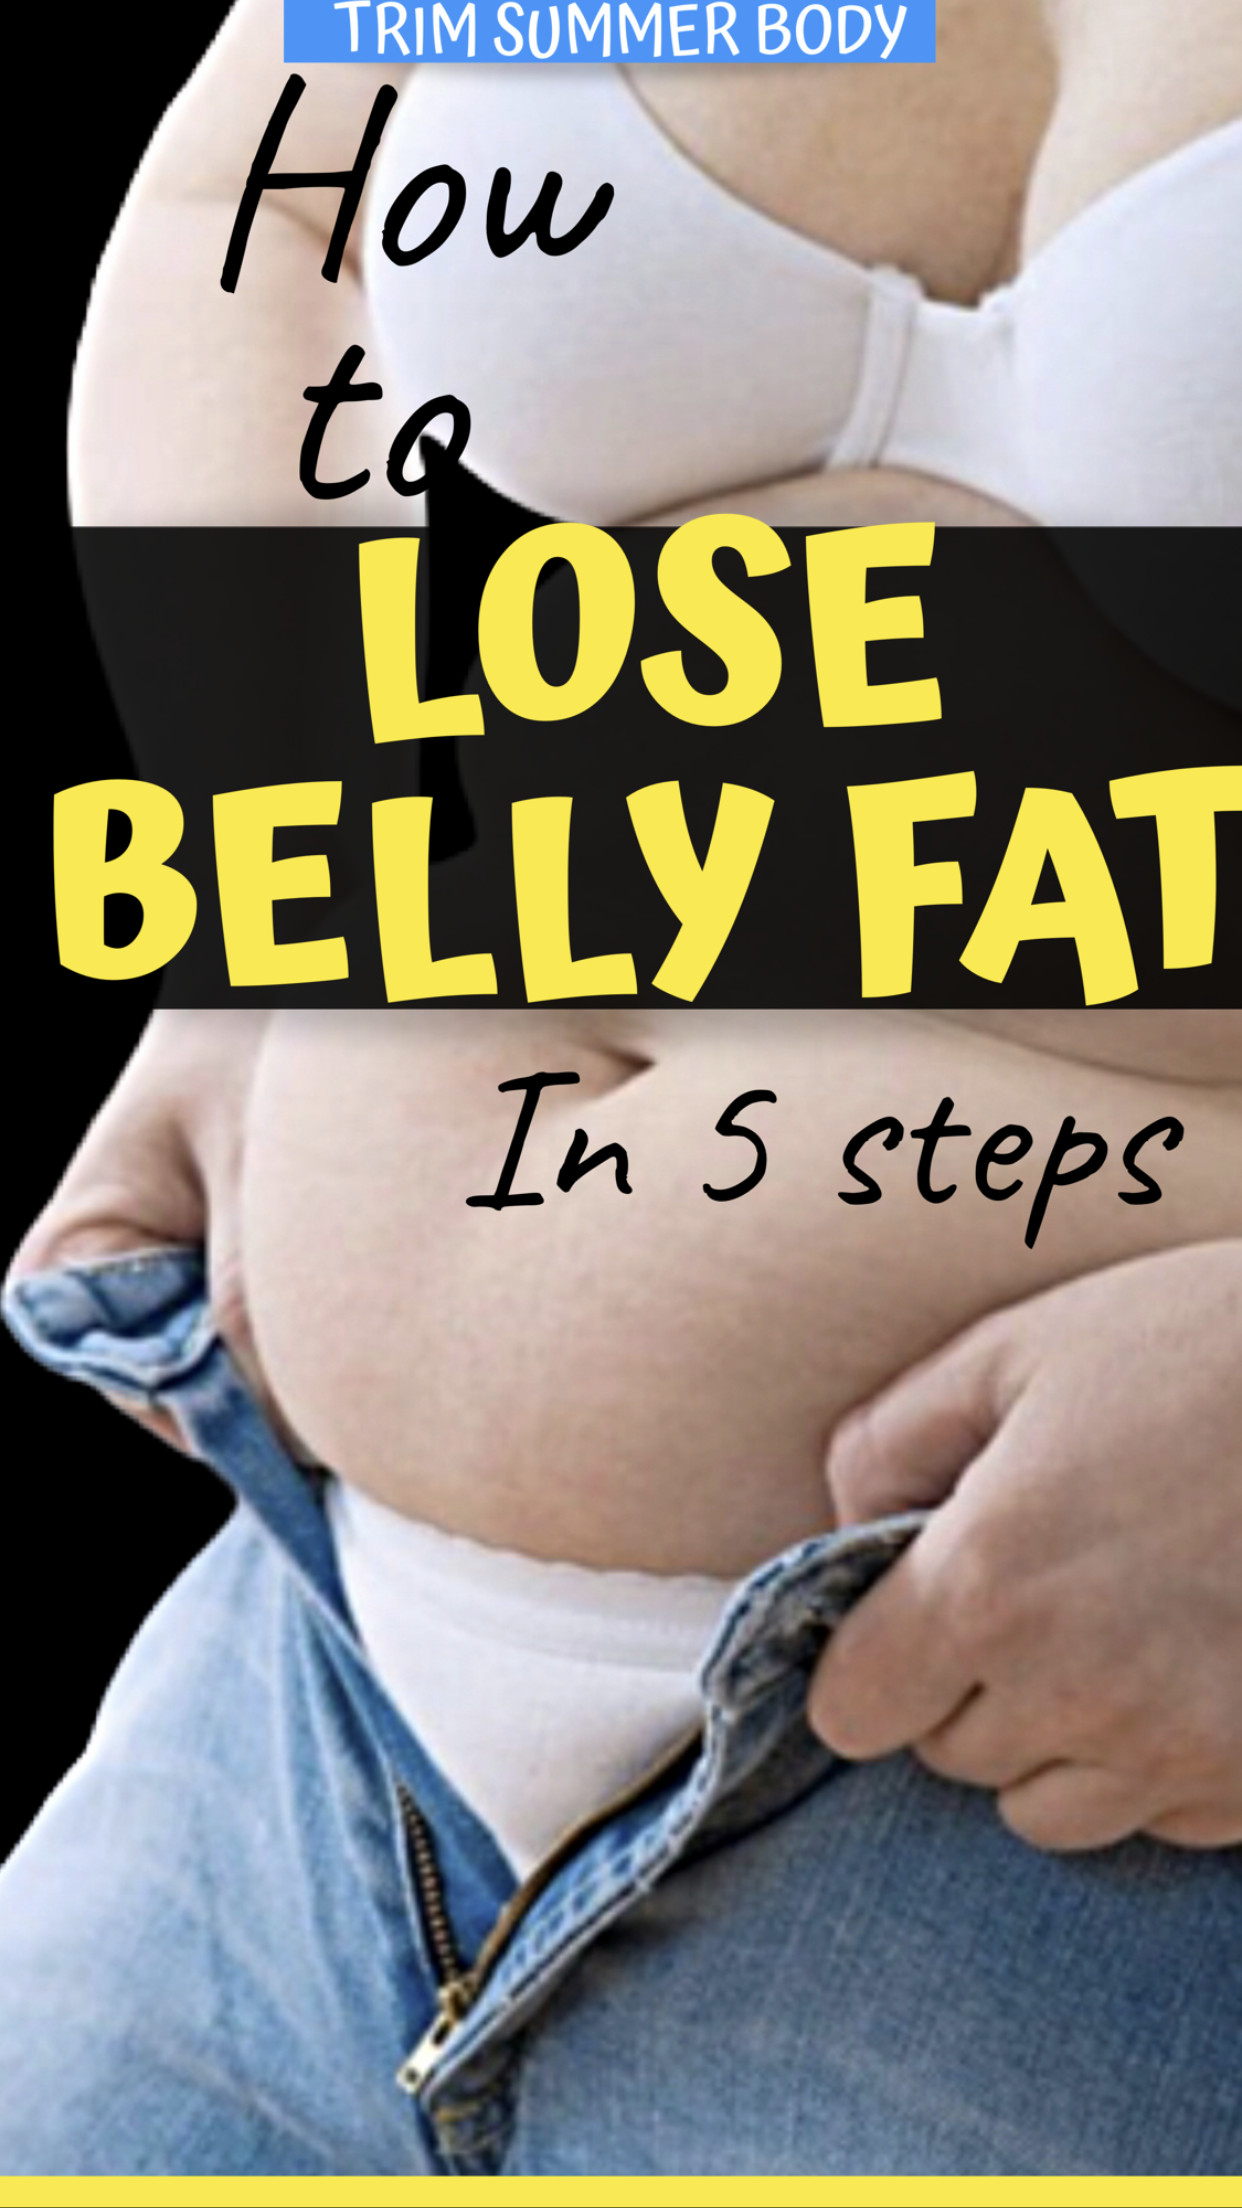 How To Lose Belly Fat Fast In A Week For Teens
 Pin on Weight Loss Tips